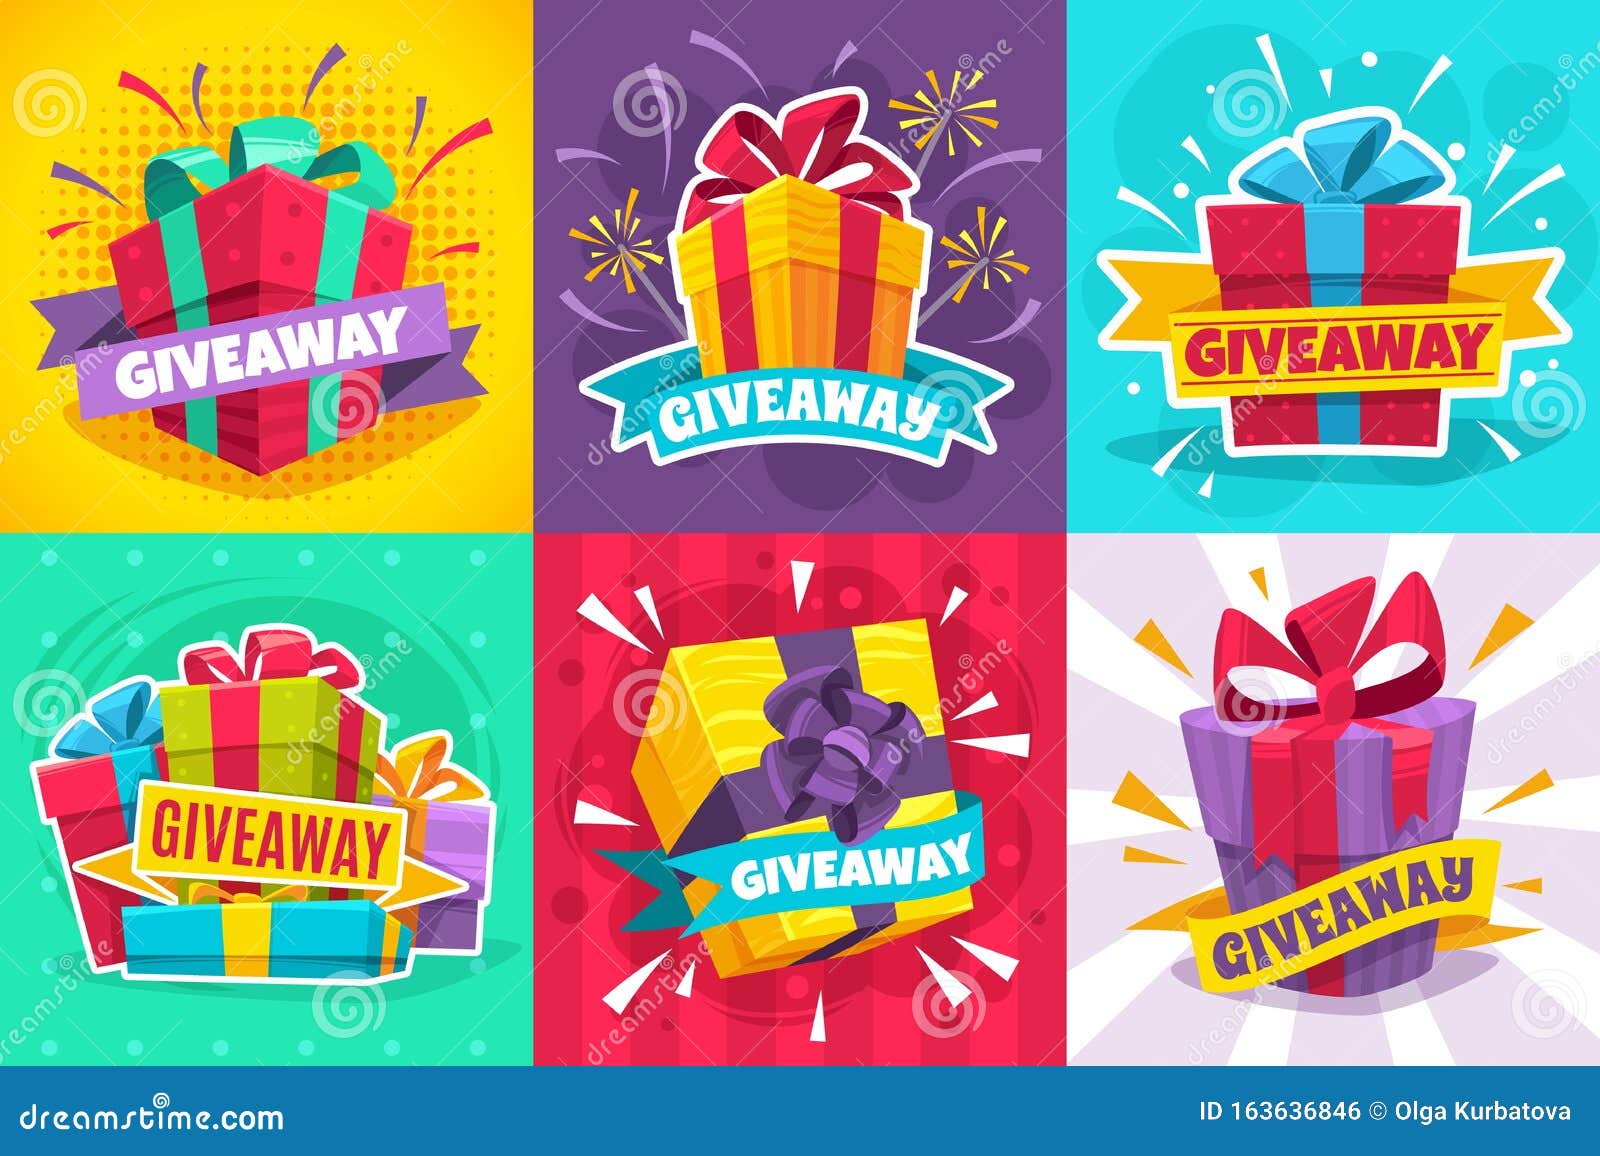 Gift Giveaways Stock Illustrations – 350 Gift Giveaways Stock  Illustrations, Vectors & Clipart - Dreamstime